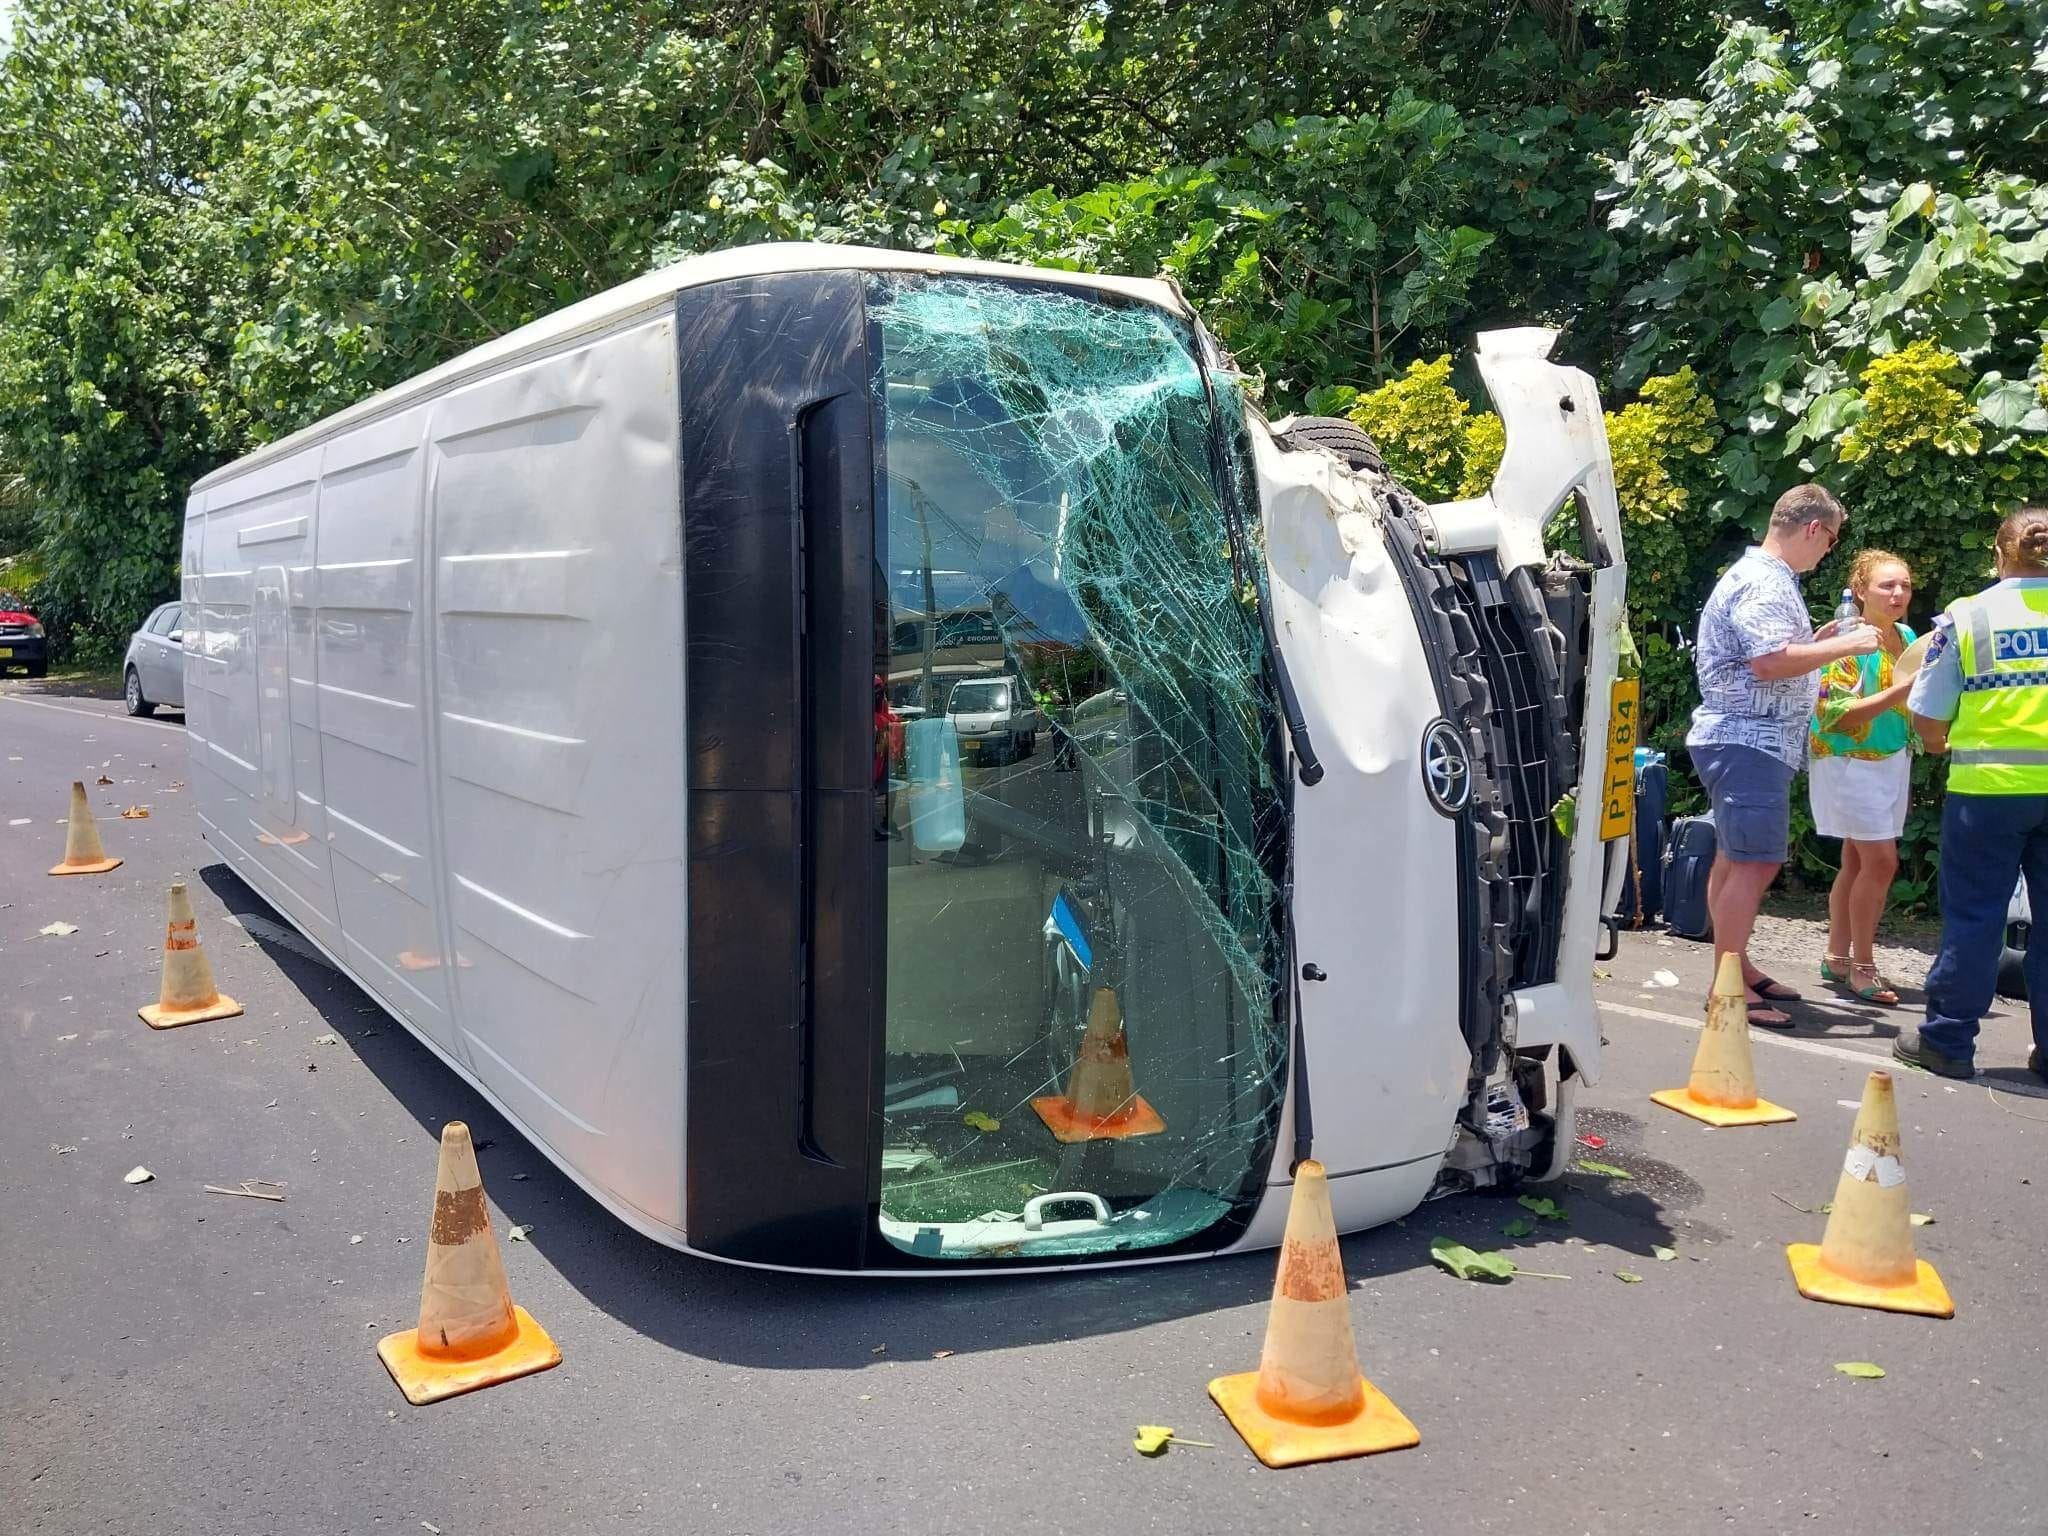 Bus crashes with eight on board